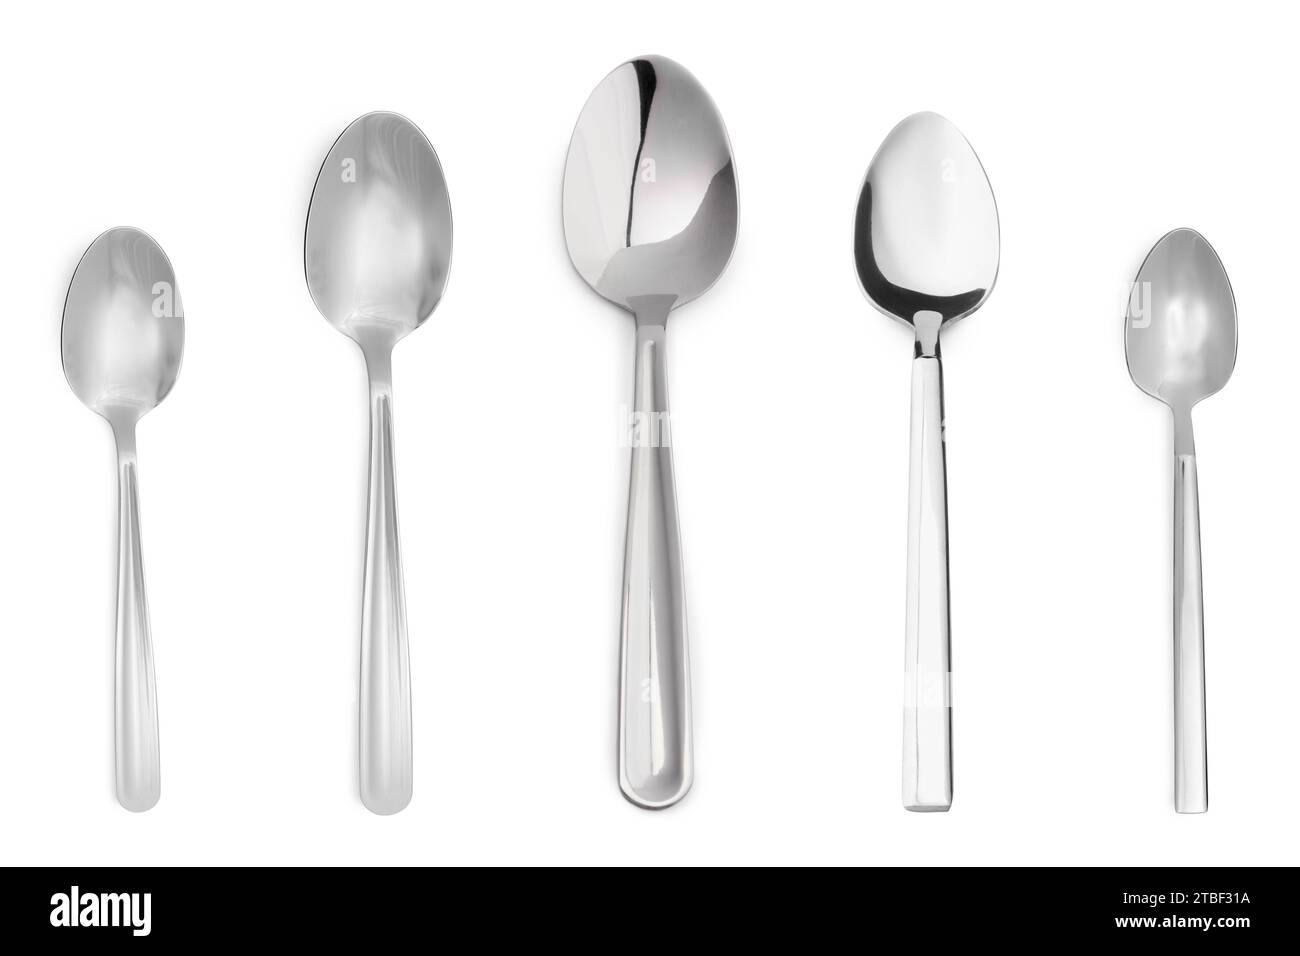 Different stylish silver spoons on white background Stock Photo